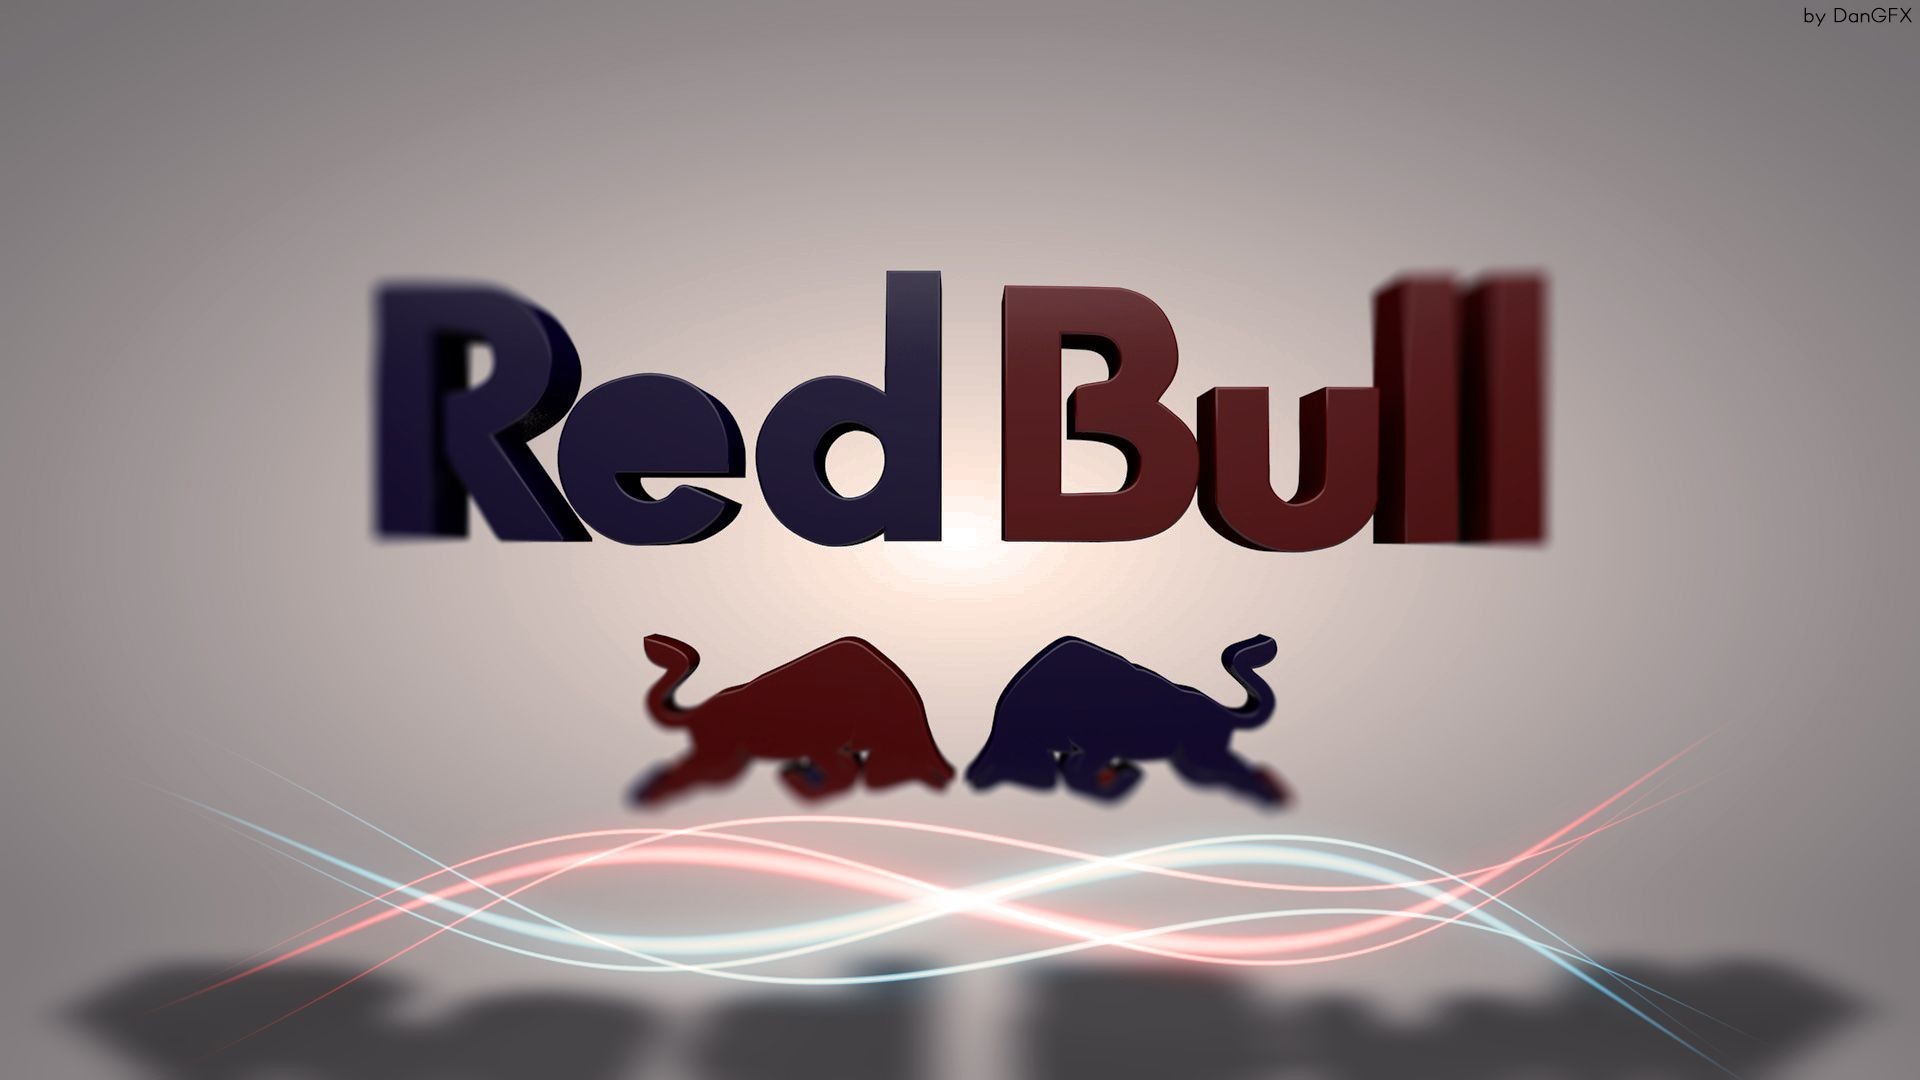 1920x1080 Awesome Red Bull Wallpaper